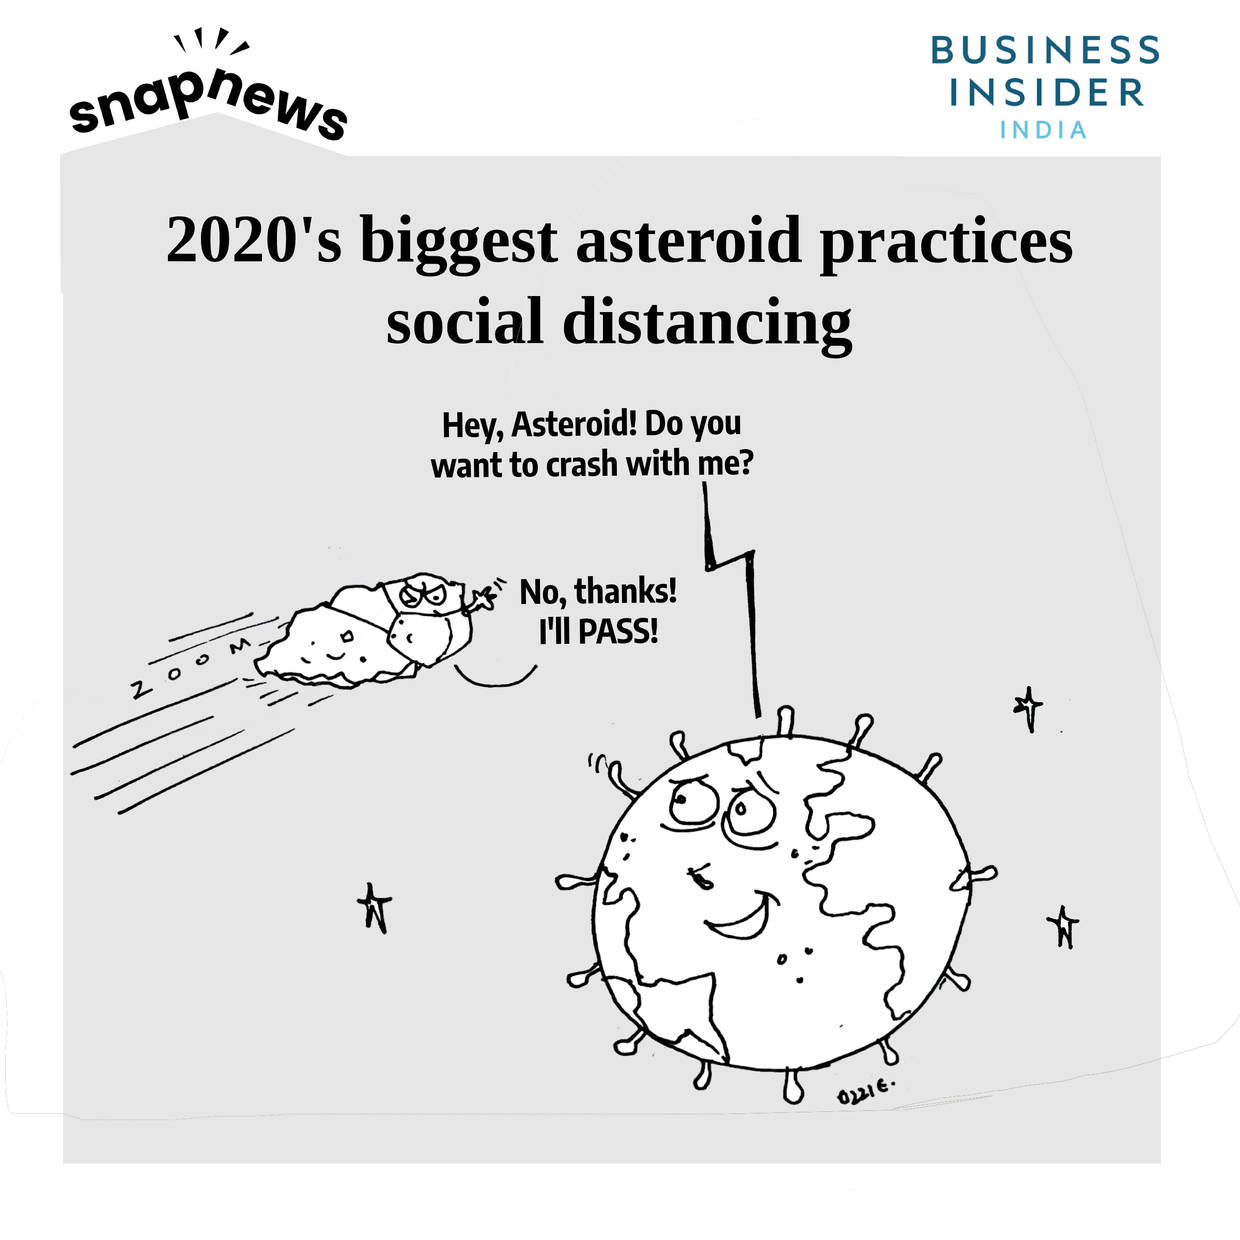 The biggest asteroid of 2020 will zoom past Earth on April 29 — adhering to 'social distancing' and even wearing a mask